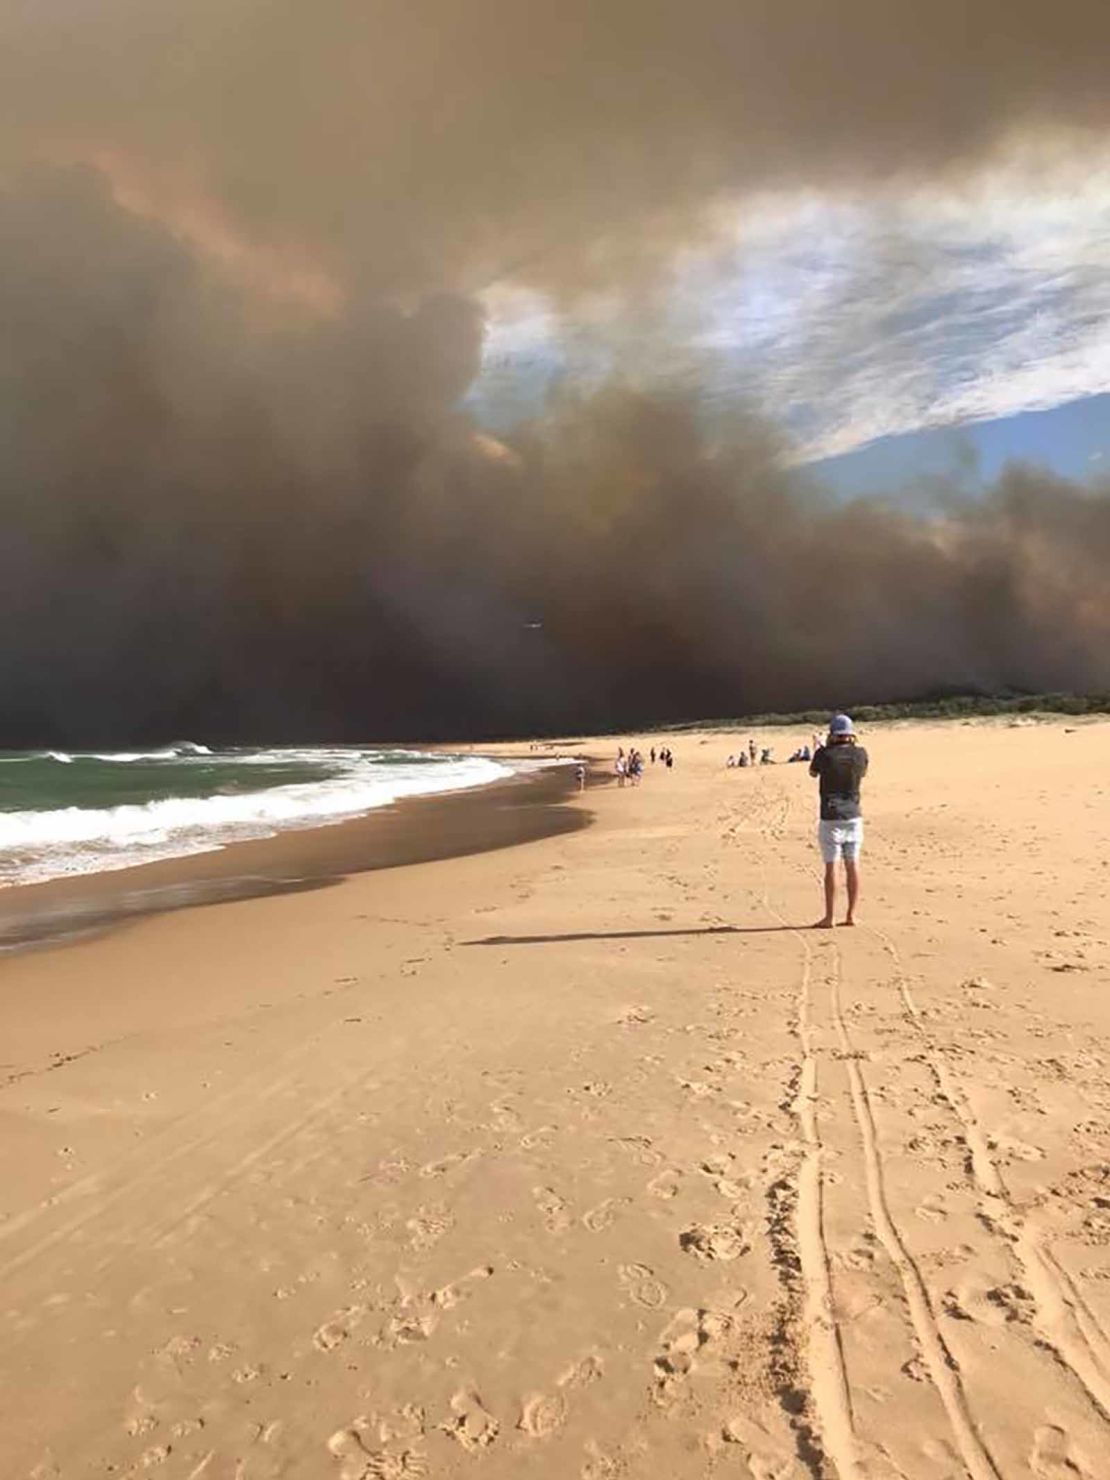 Residents fled to the beach to avoid the flames. 